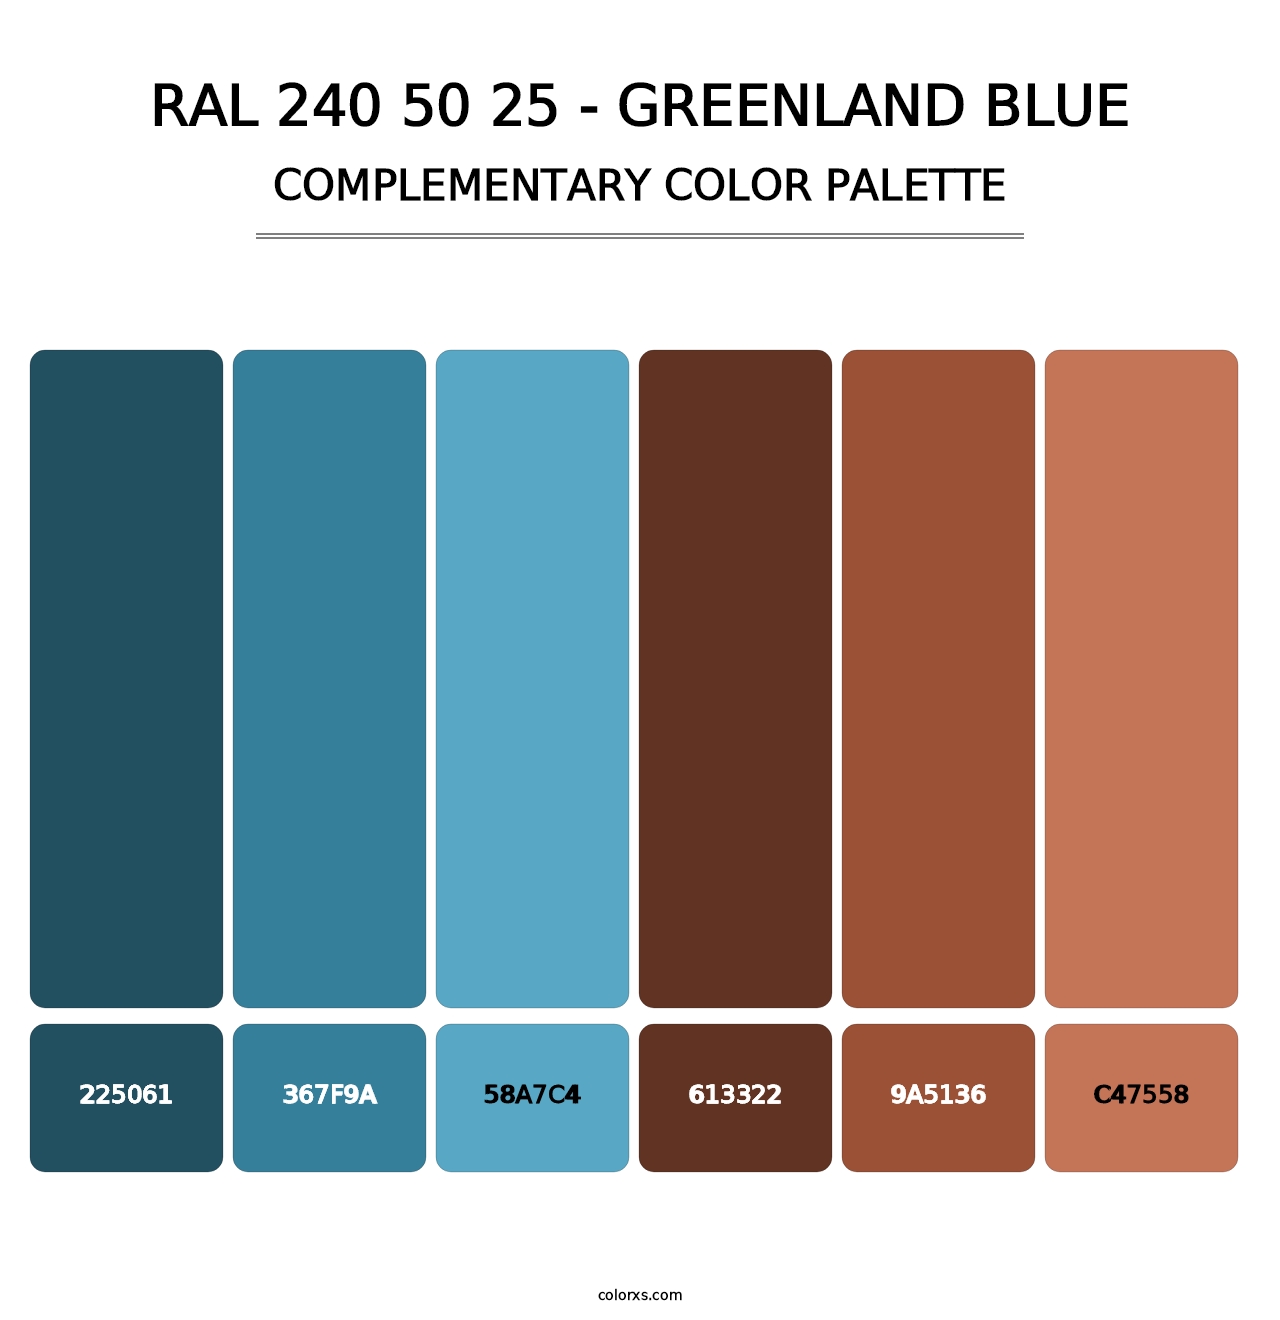 RAL 240 50 25 - Greenland Blue - Complementary Color Palette